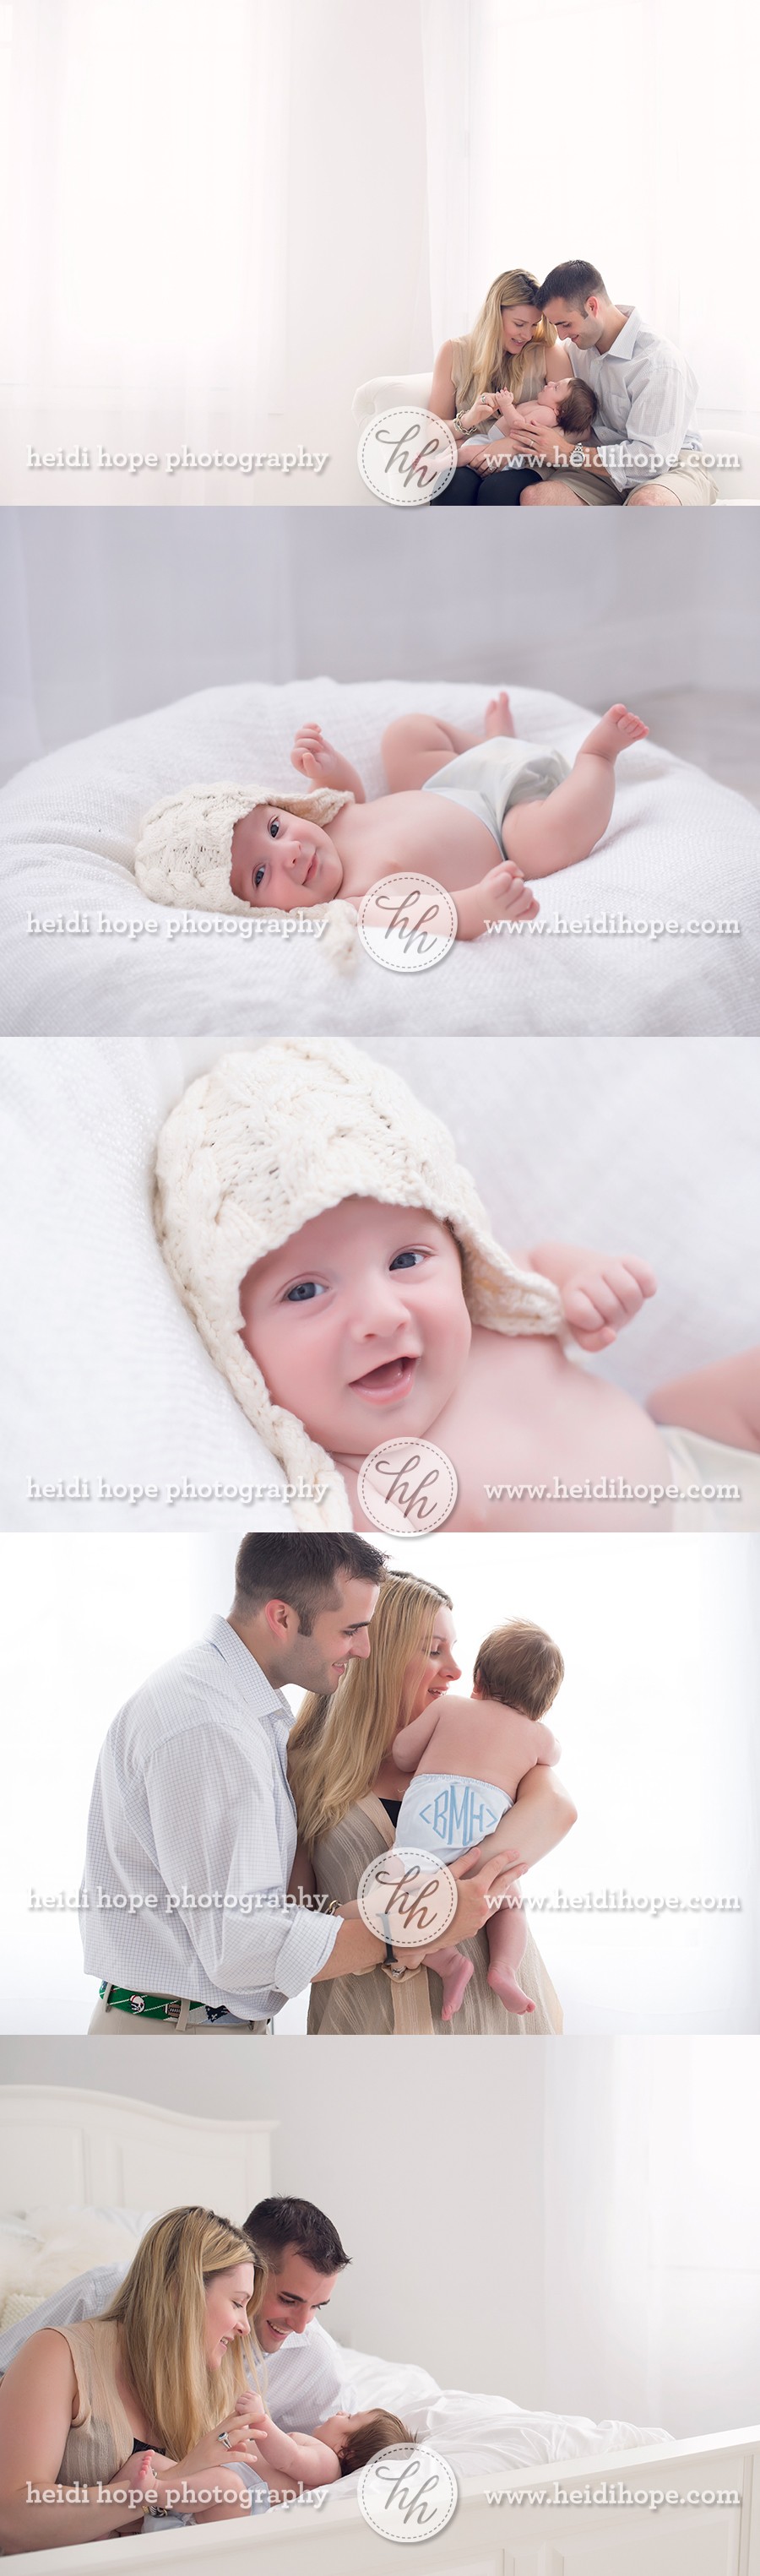 A sneak peek of 3 month old baby B’s session in the new studio.